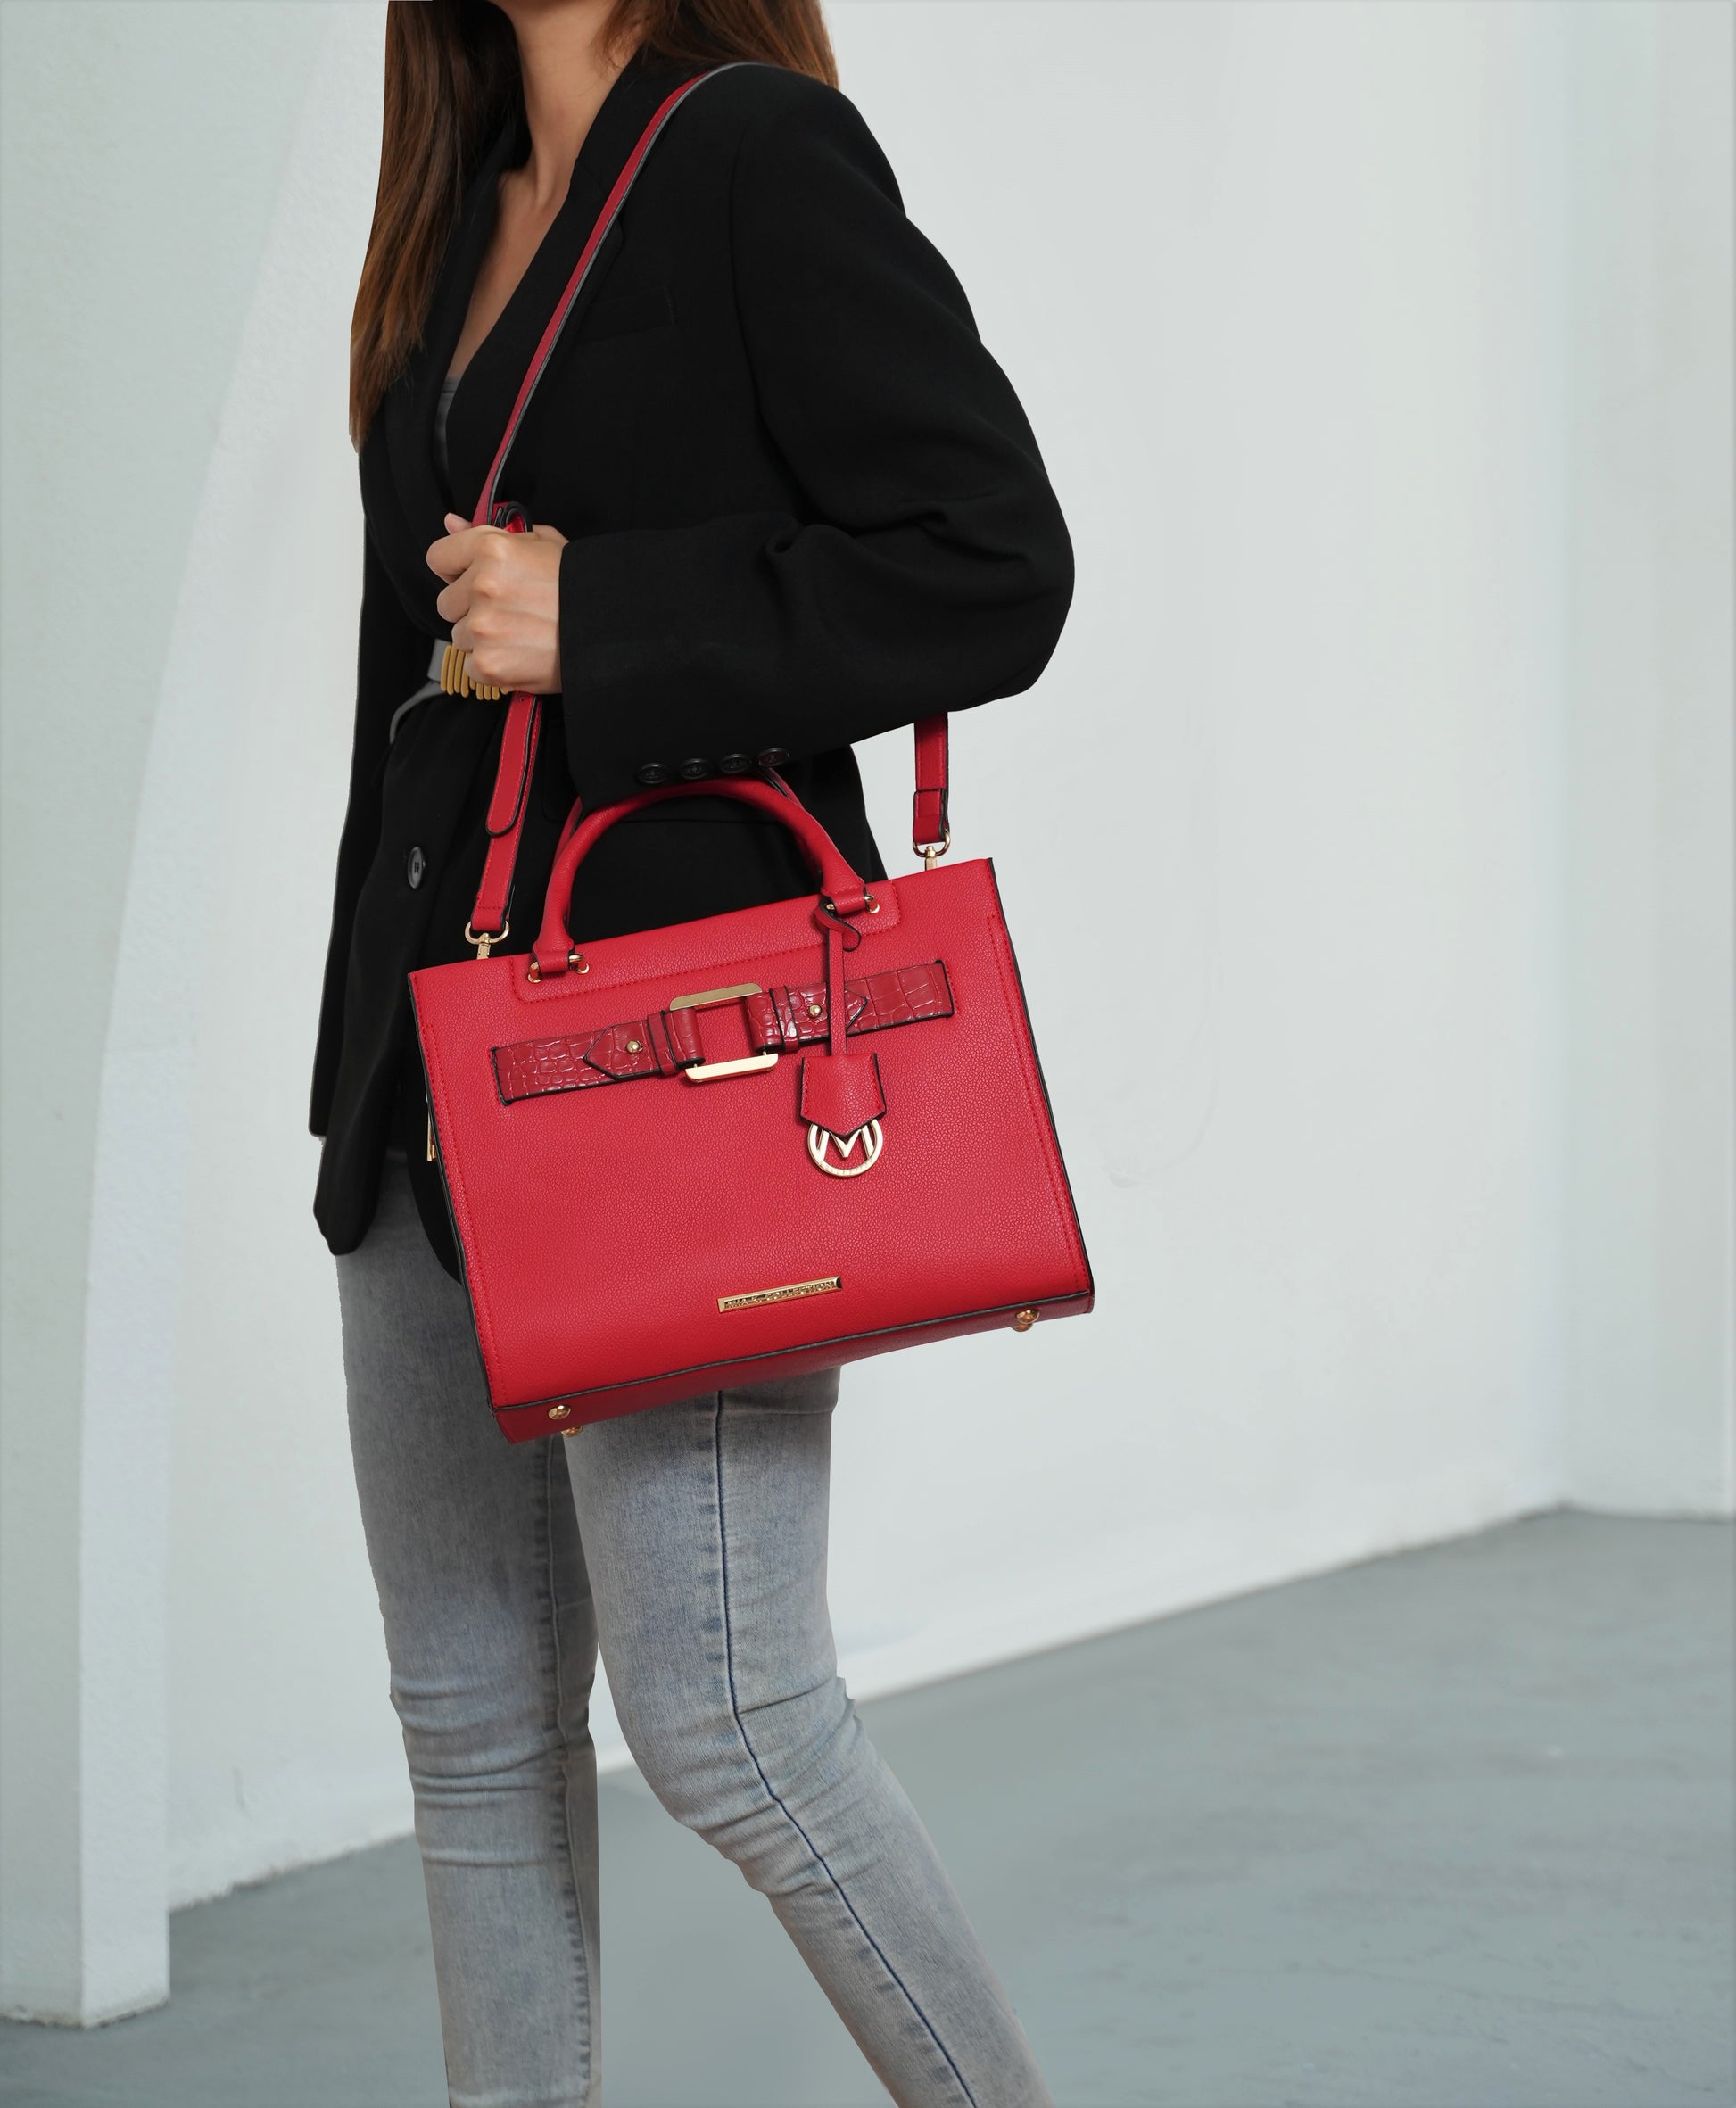 A woman wearing a black jacket and jeans with a Virginia Vegan Leather Women Tote Bag with Wallet featuring a crocodile-embossed finish from Pink Orpheus.